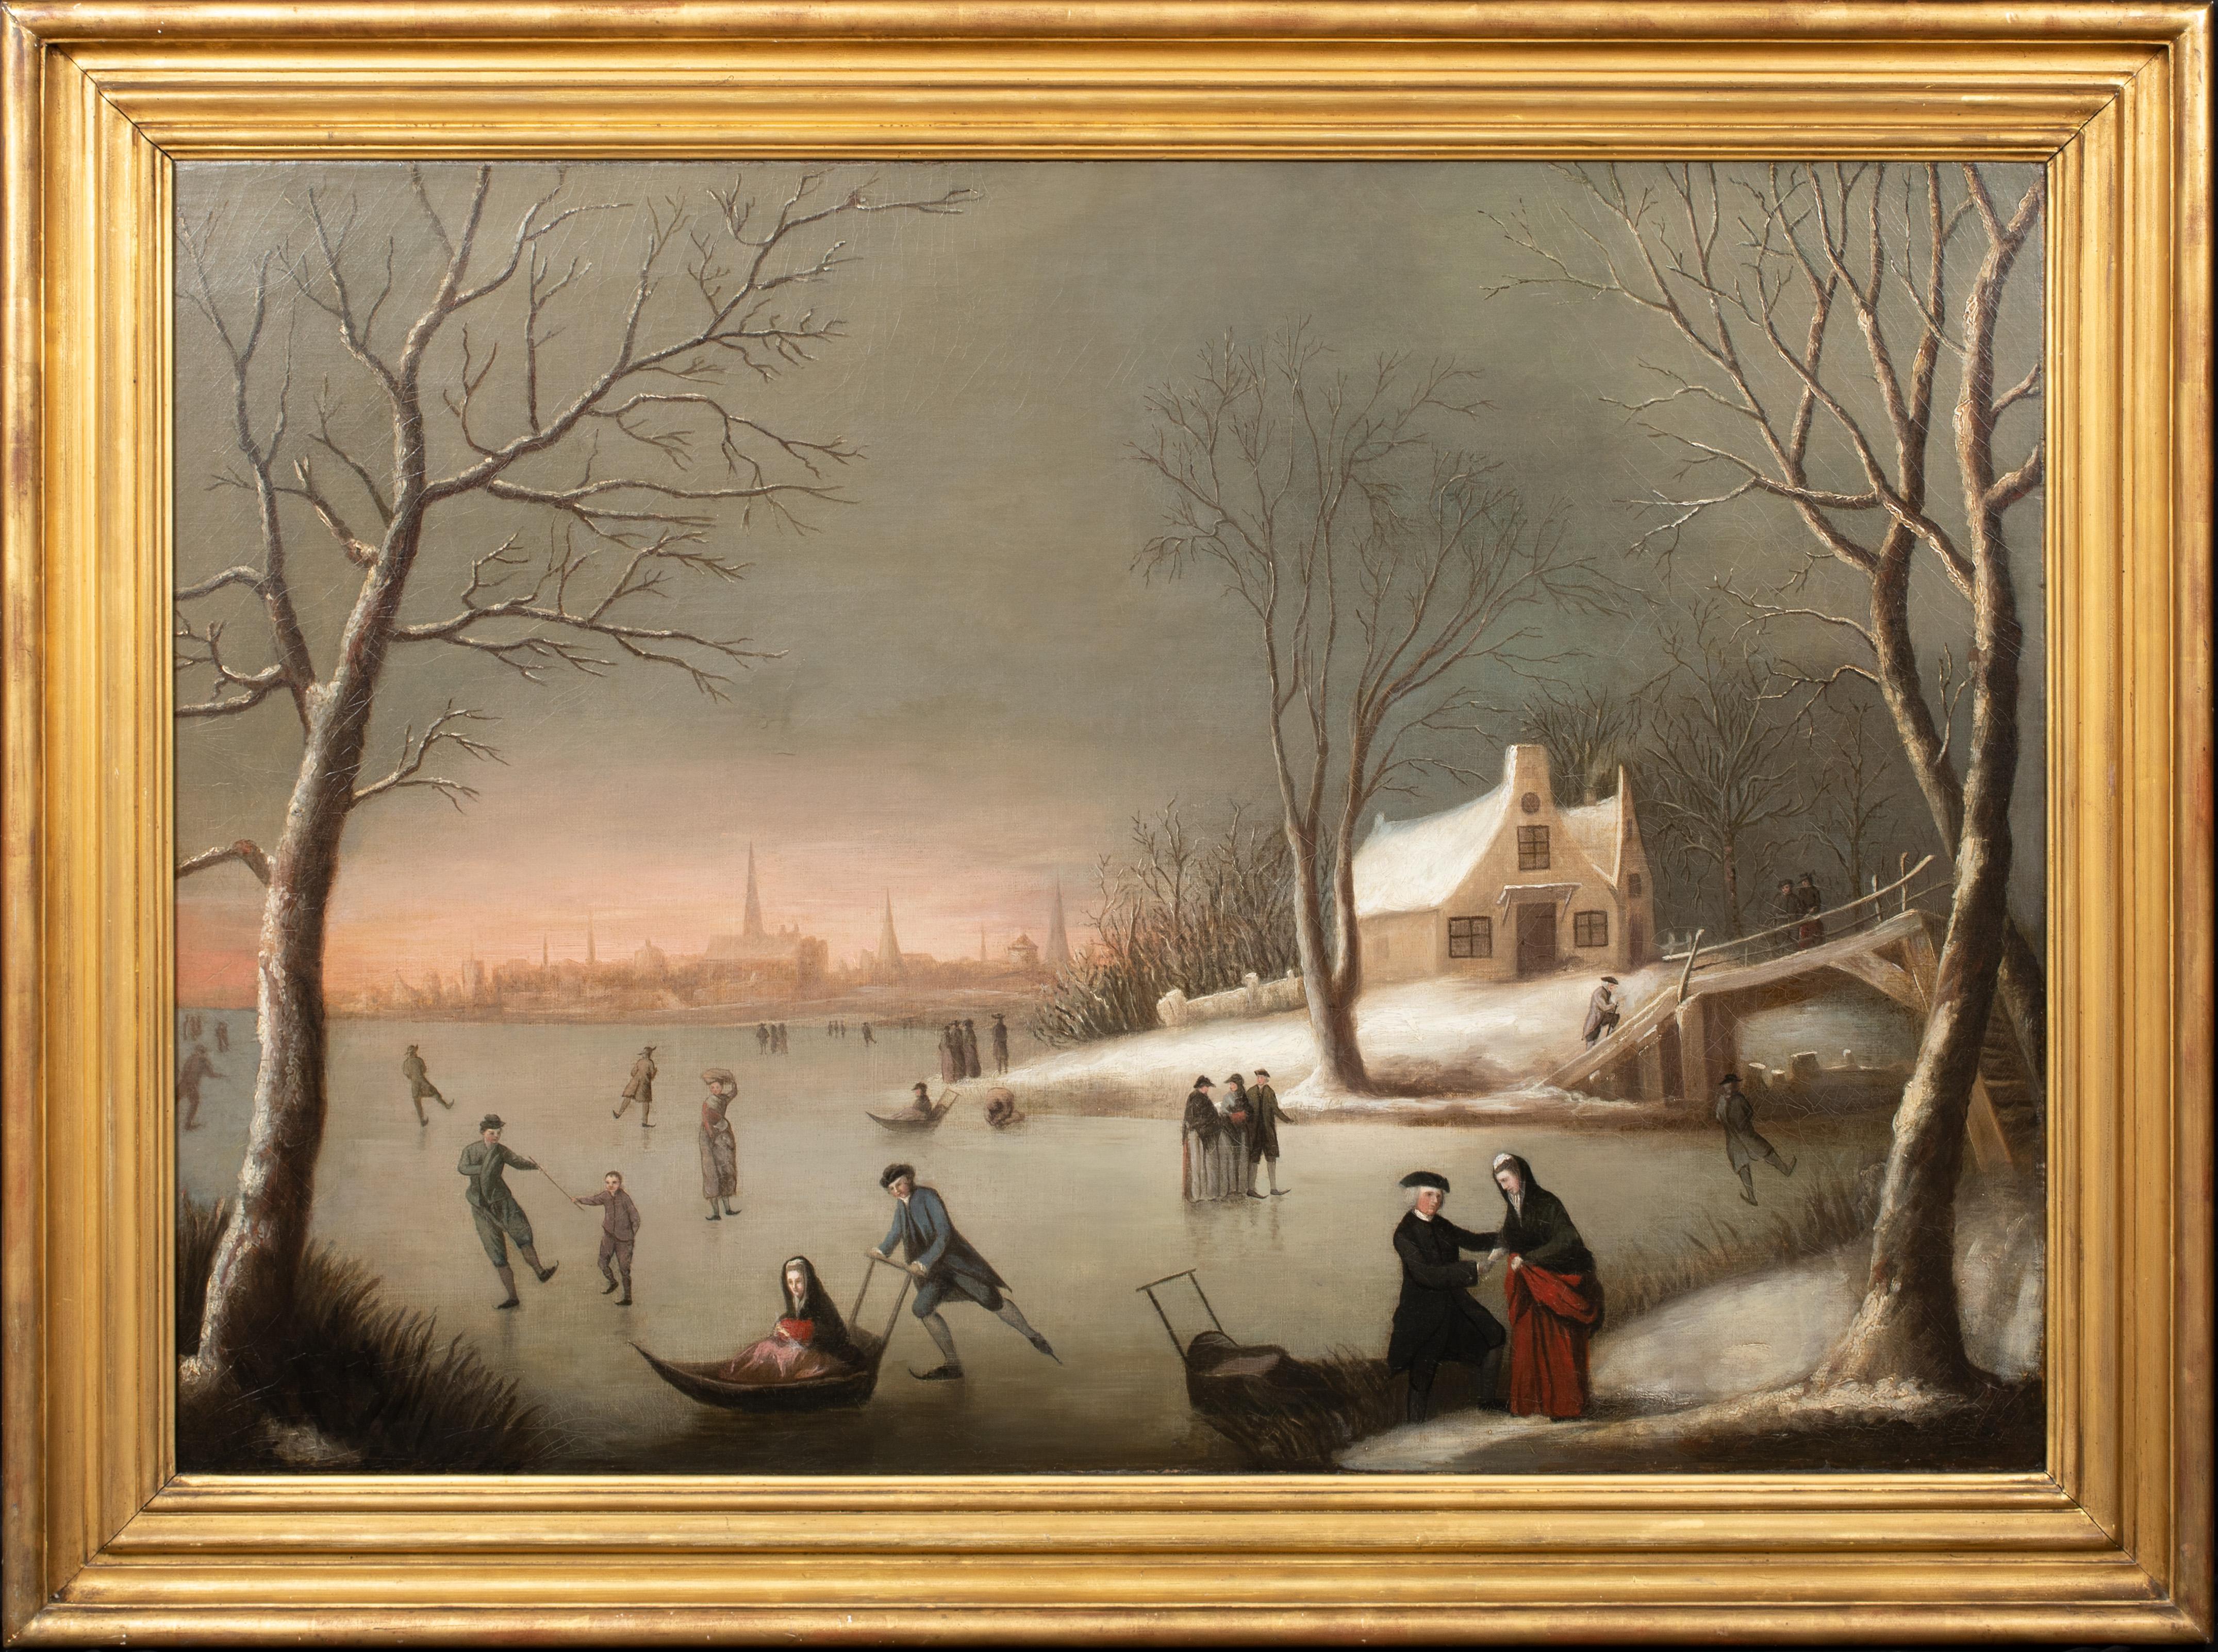 Figures Ice Skating IN A Frozen Winter Landscape, 18th Century  - Painting by Unknown